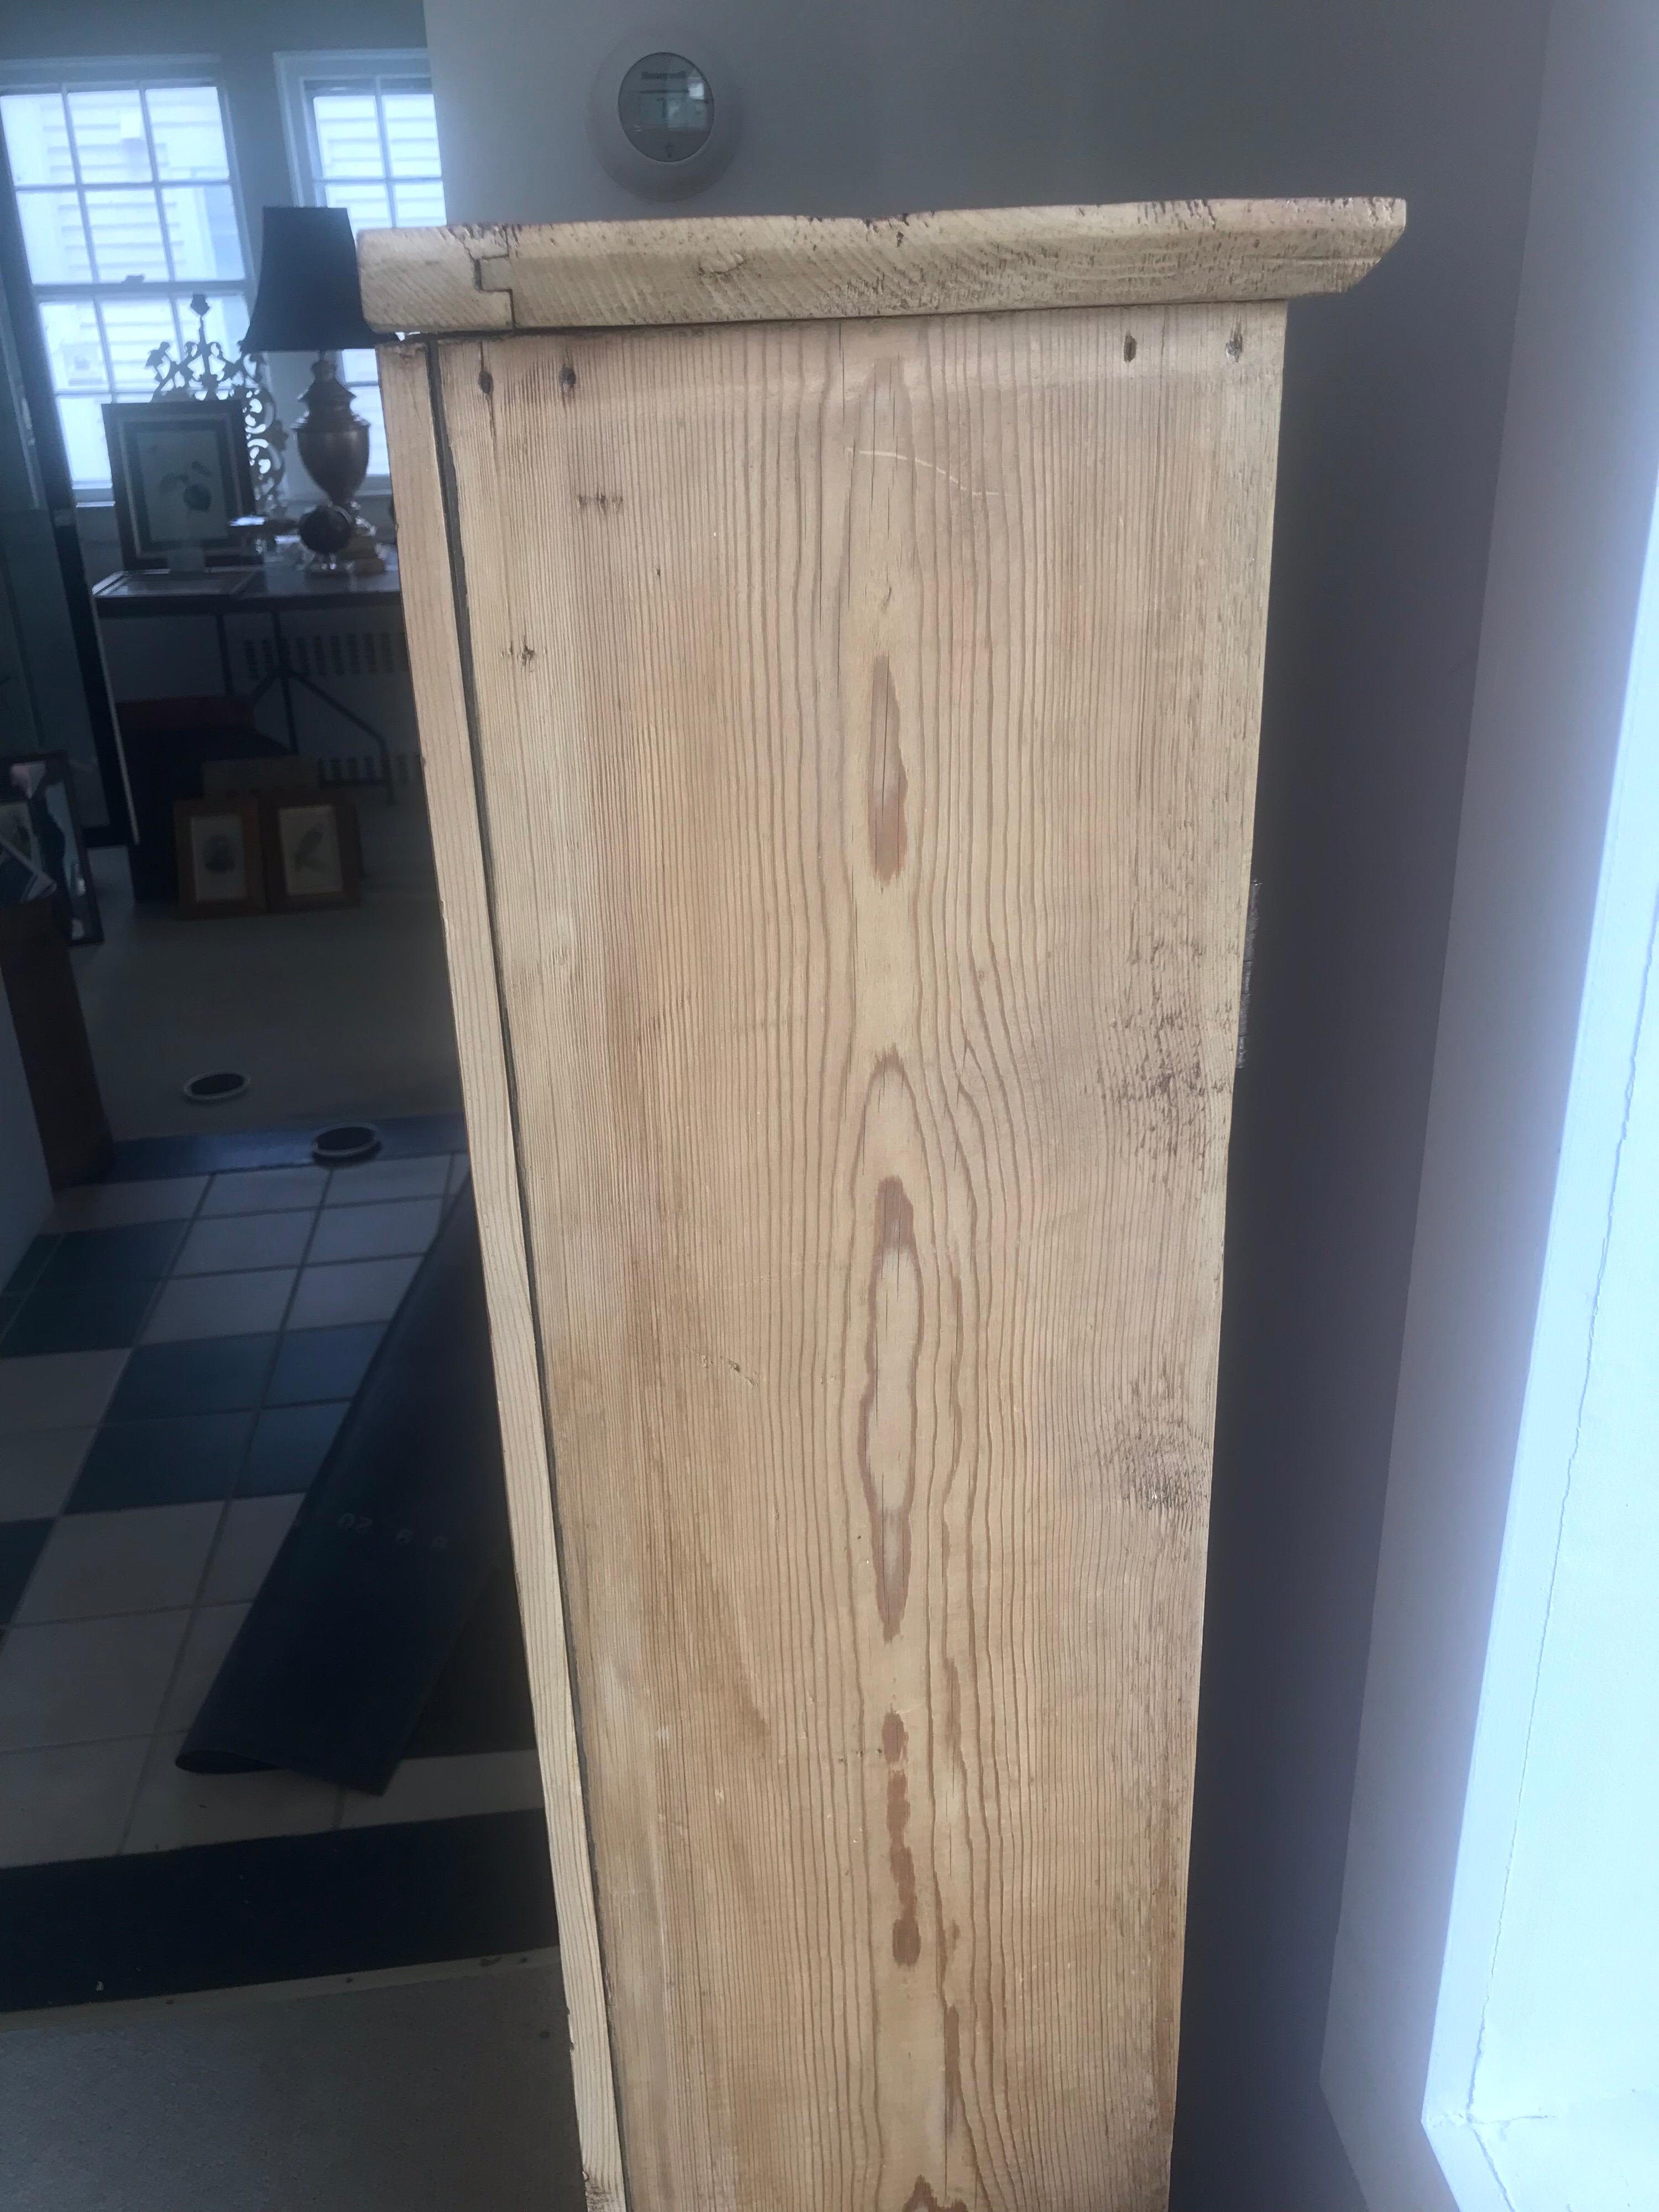 Early 20th Century Pine Lockers for Child’s Room, Mudroom, Hallway 2